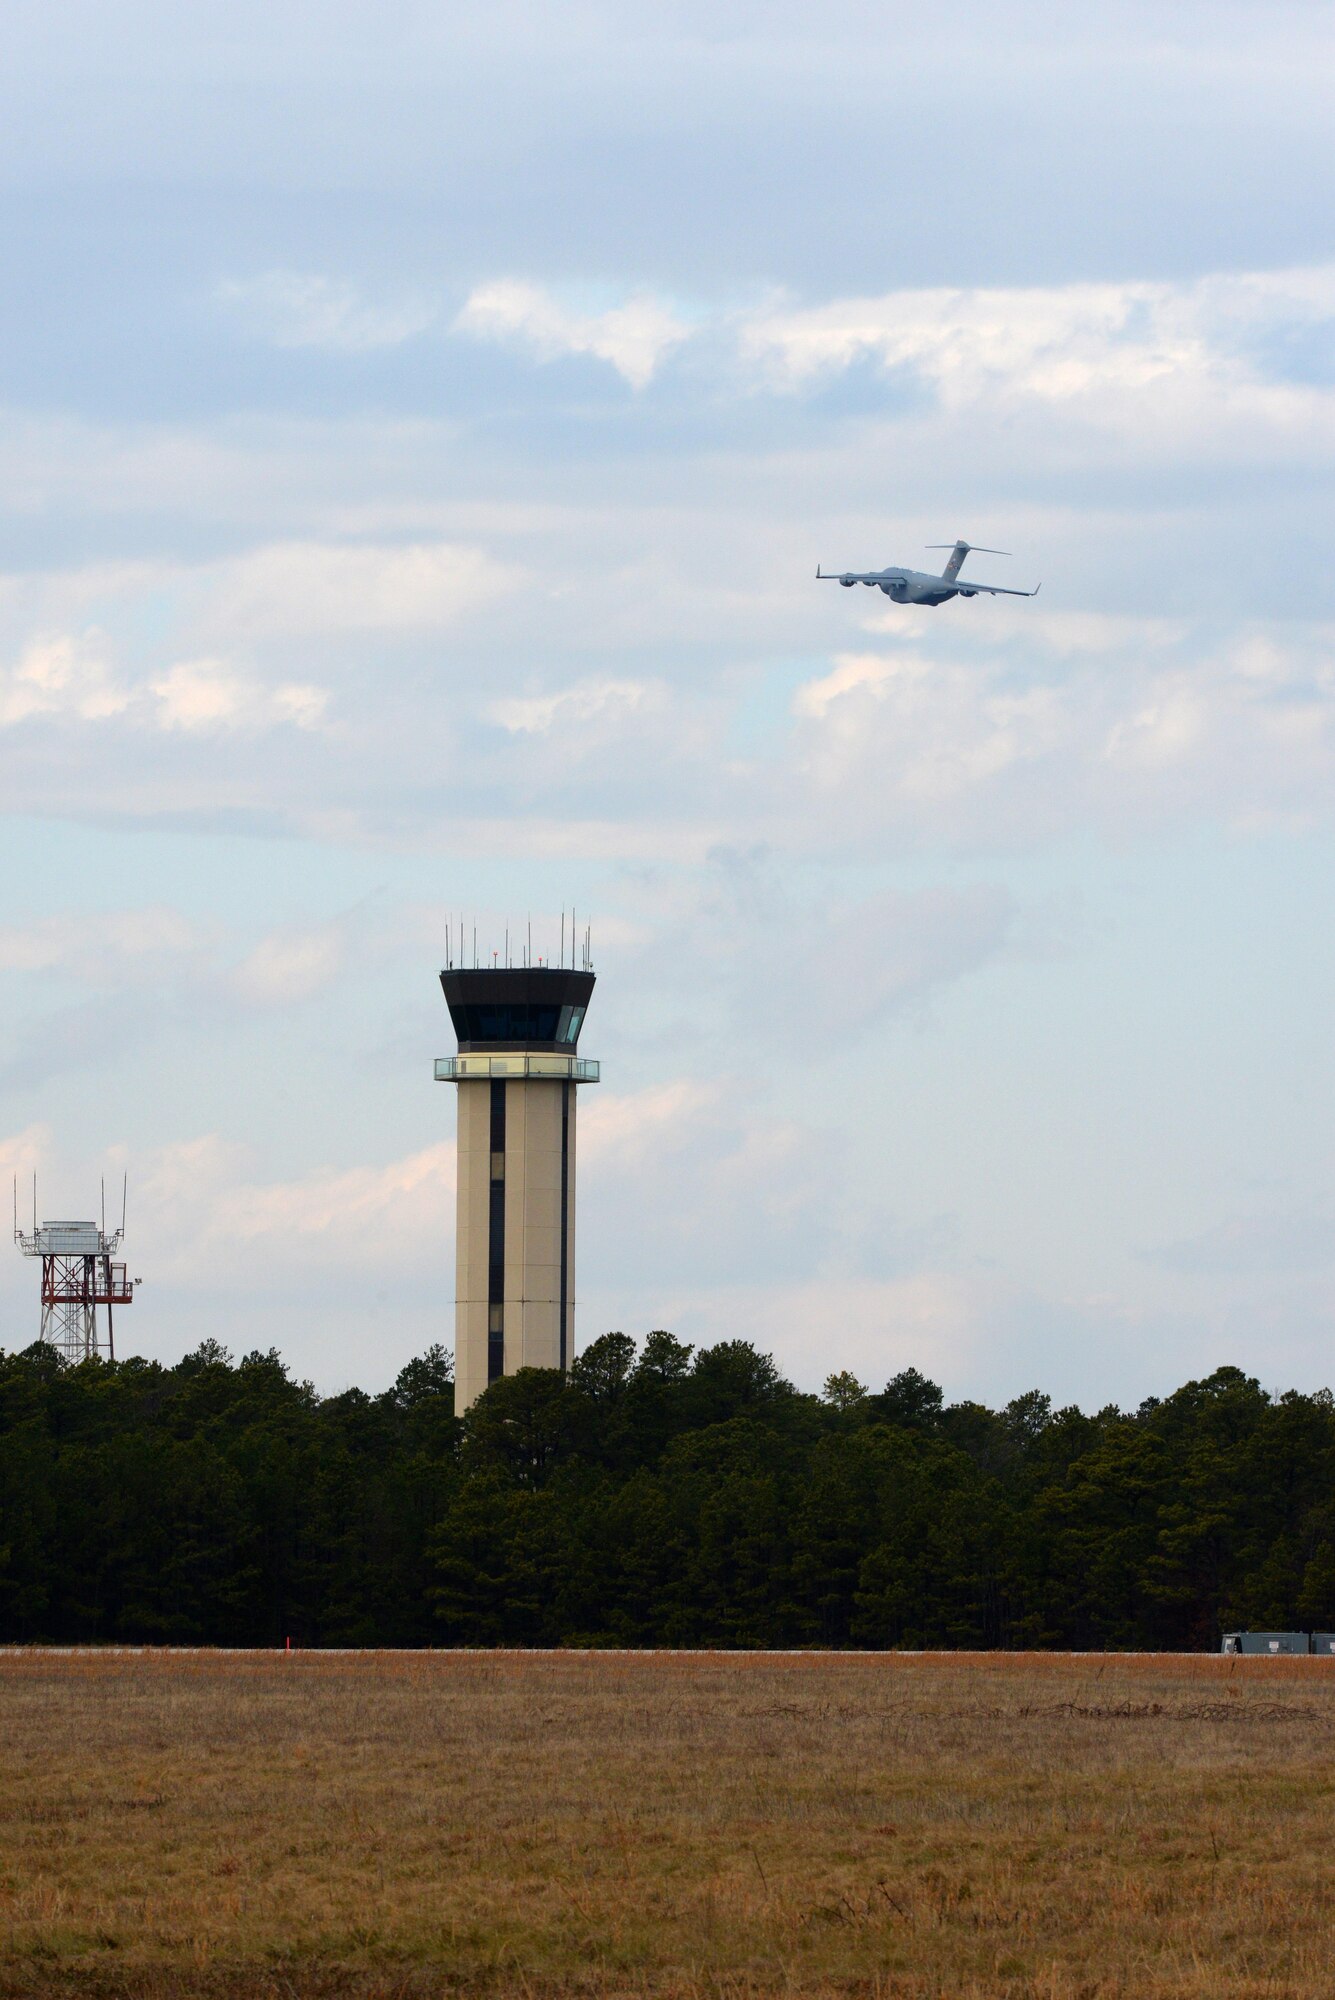 A picture of a U.S. Air Force C-17 Globemaster III taking off from the Atlantic City International Airport in Egg Harbor Township, N.J.